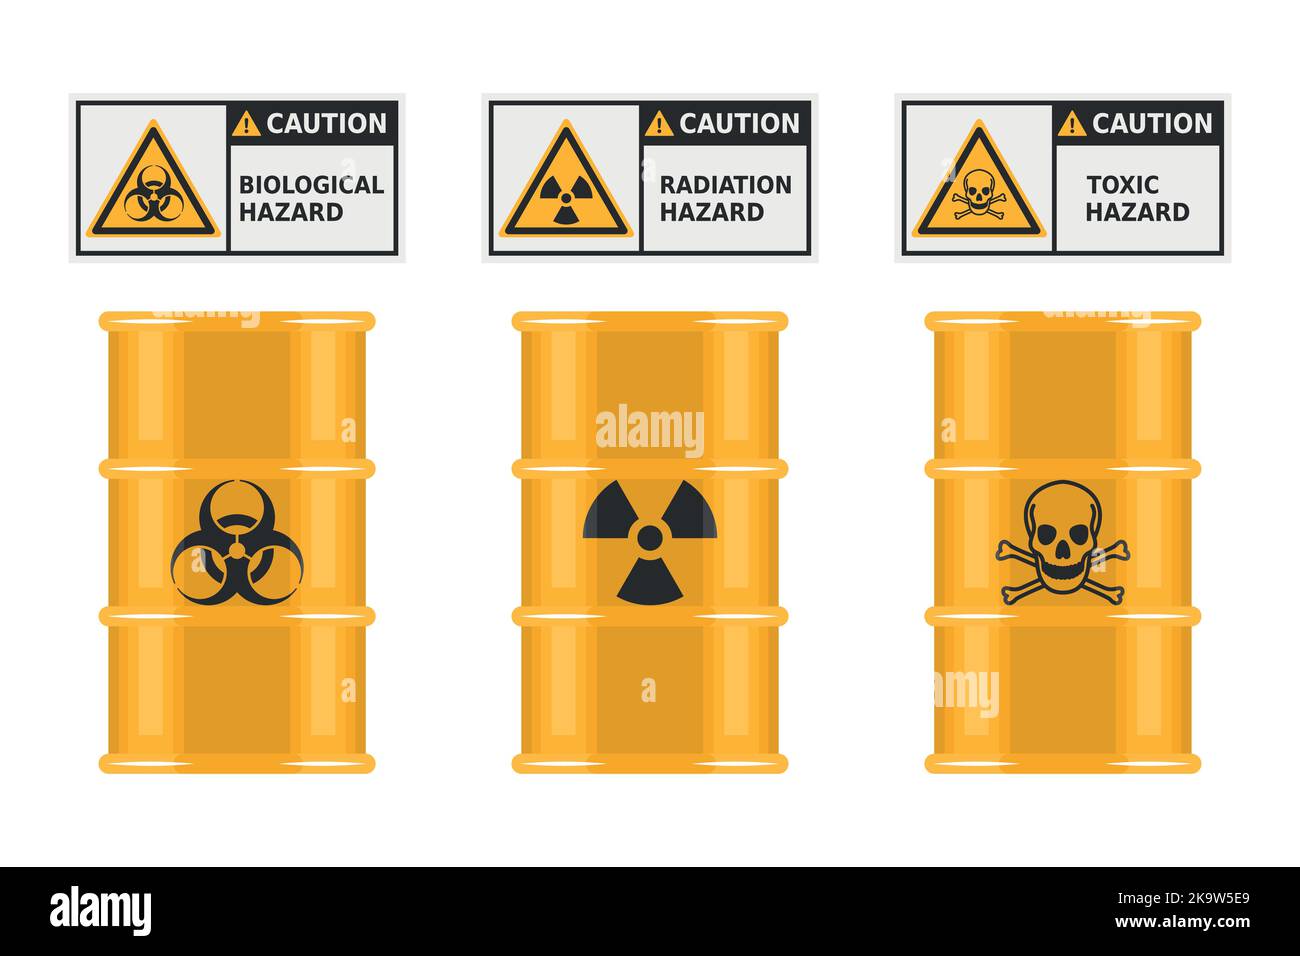 Sign and hazard pictograms. Barrel of toxic, radioactive and biological materials. Management of hazardous substances and materials. Safety first. Ind Stock Vector